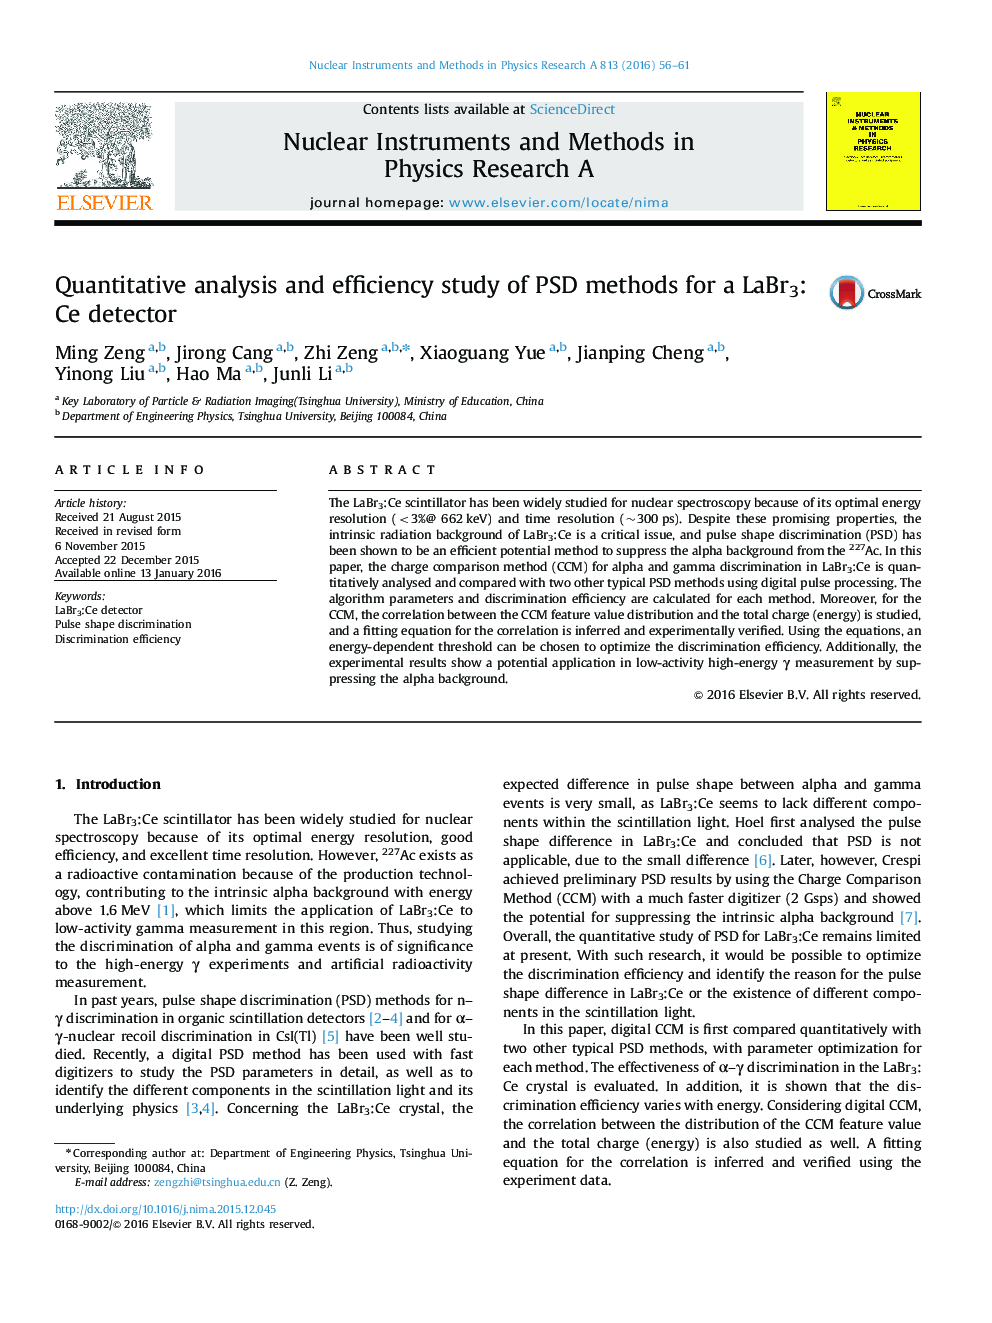 Quantitative analysis and efficiency study of PSD methods for a LaBr3:Ce detector